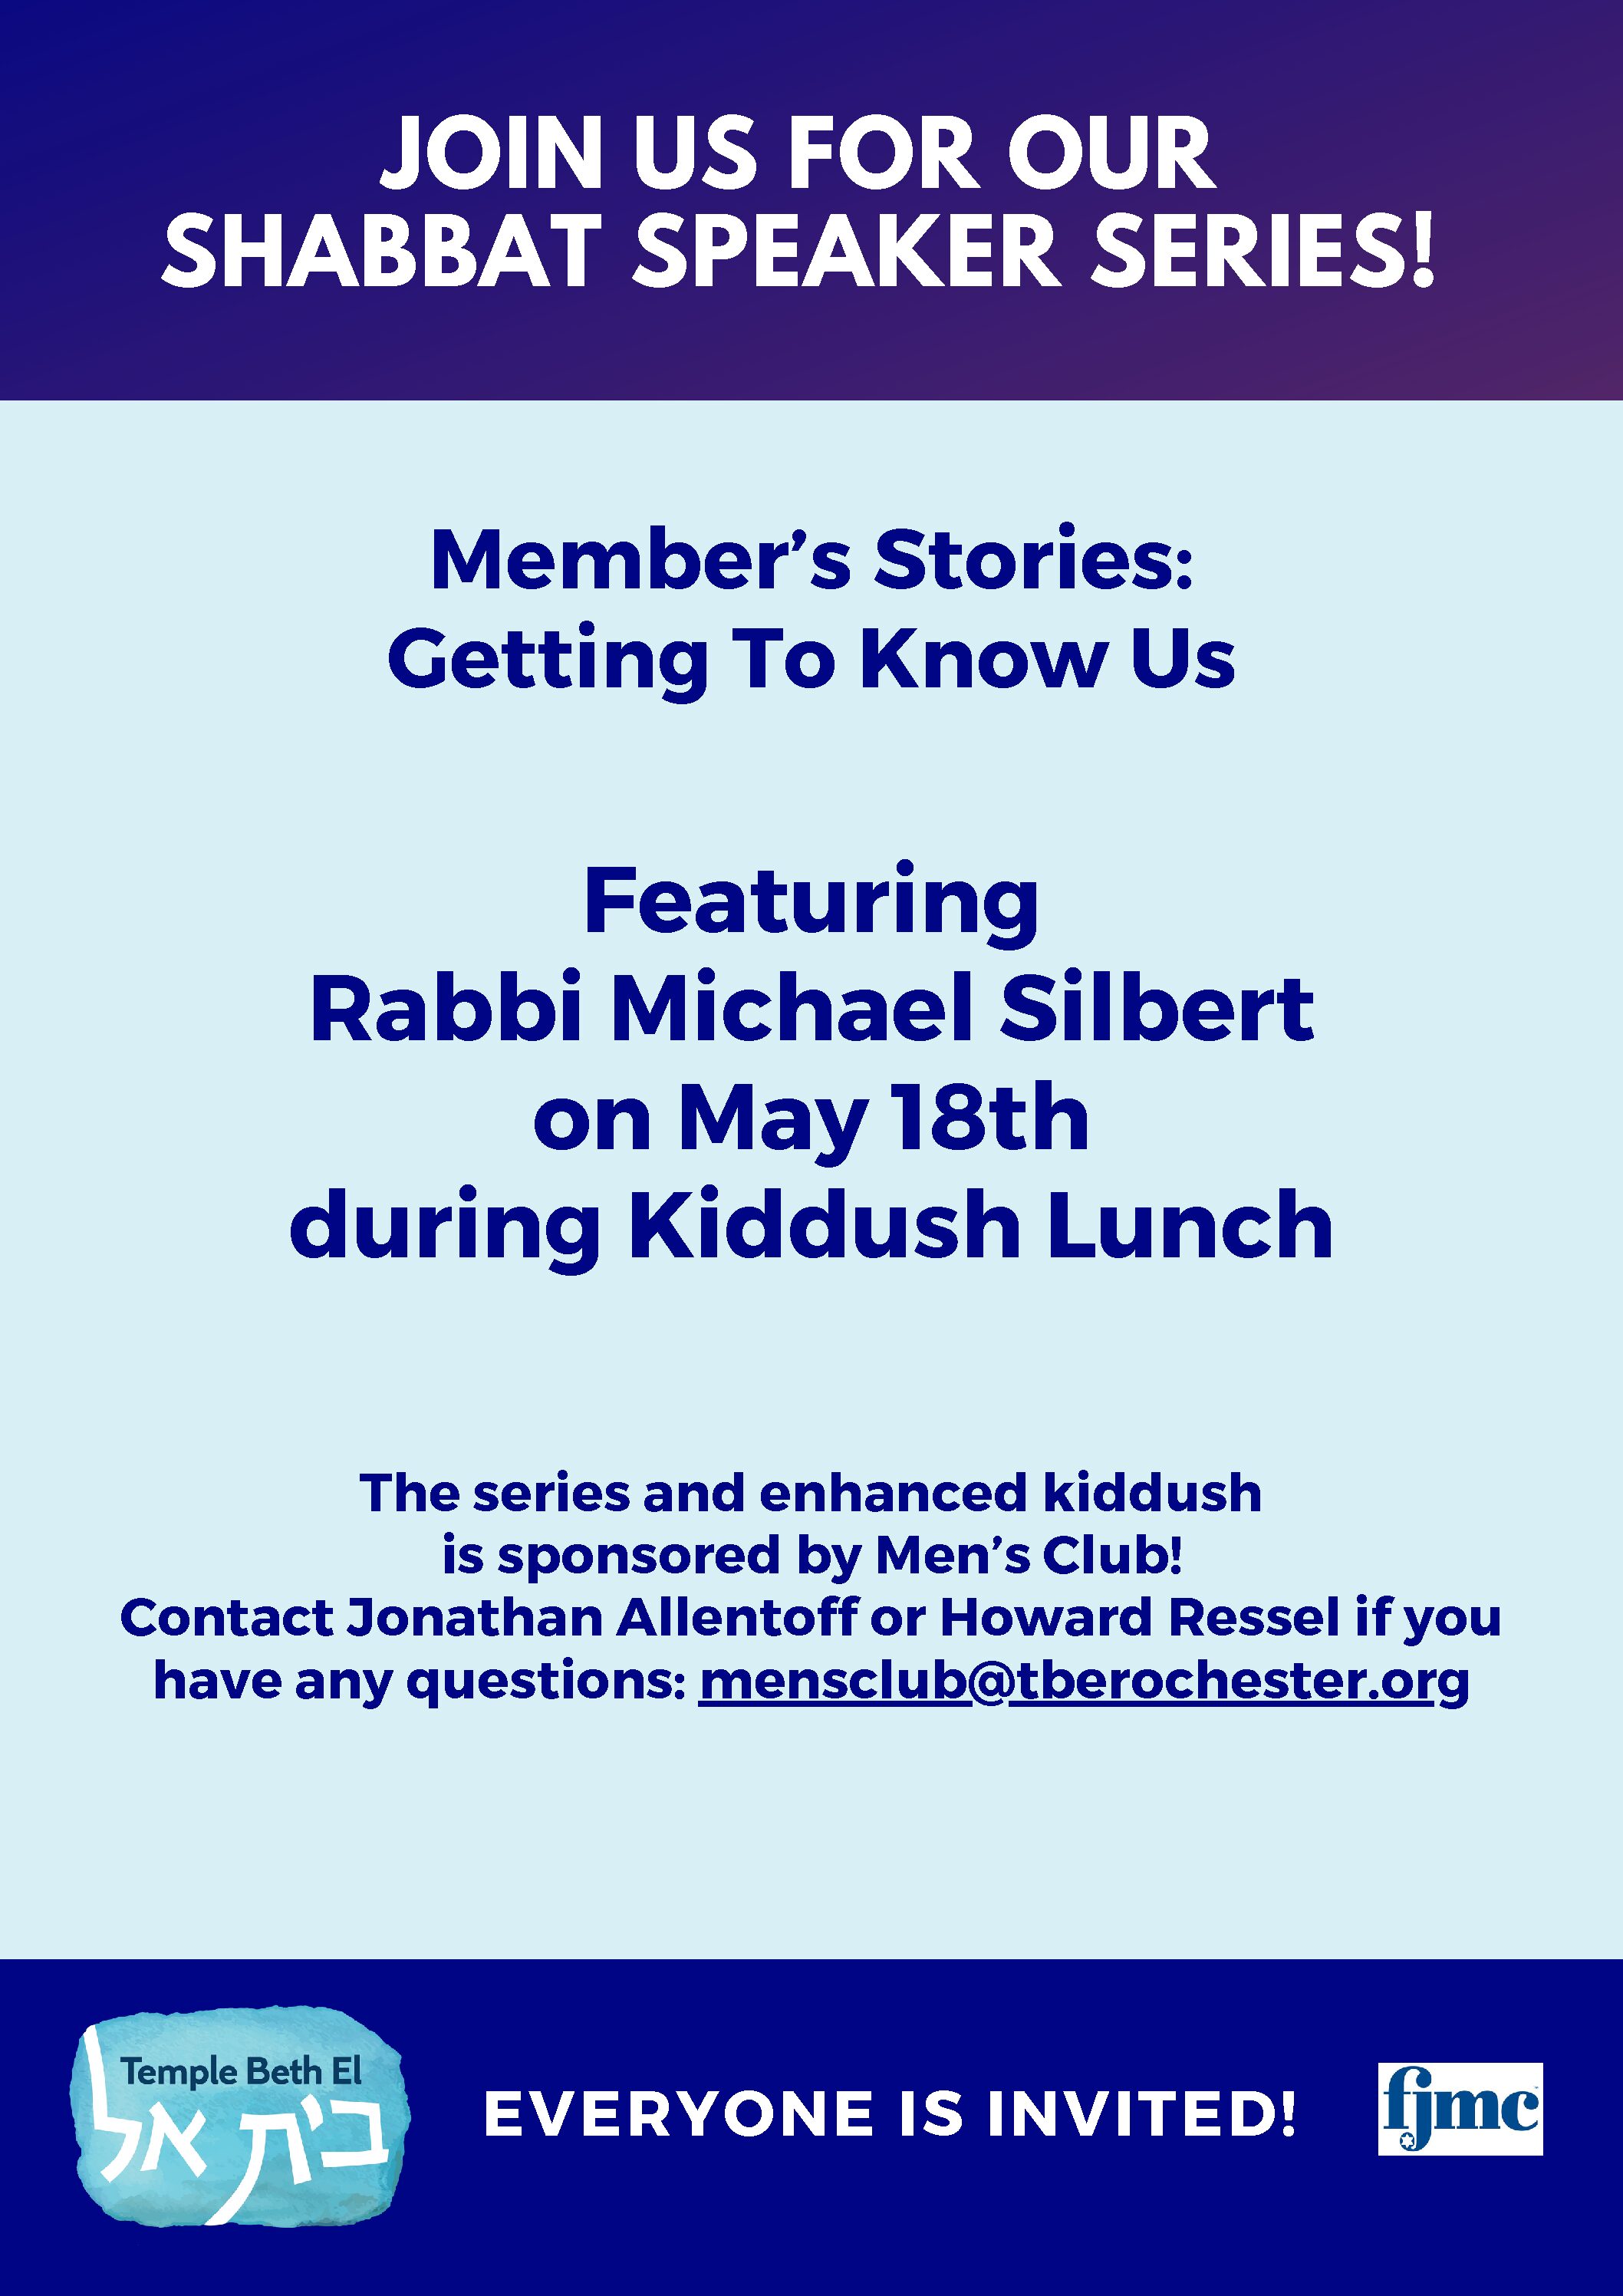 Member's Stories: Getting to Know us with Rabbi Michael Silbert